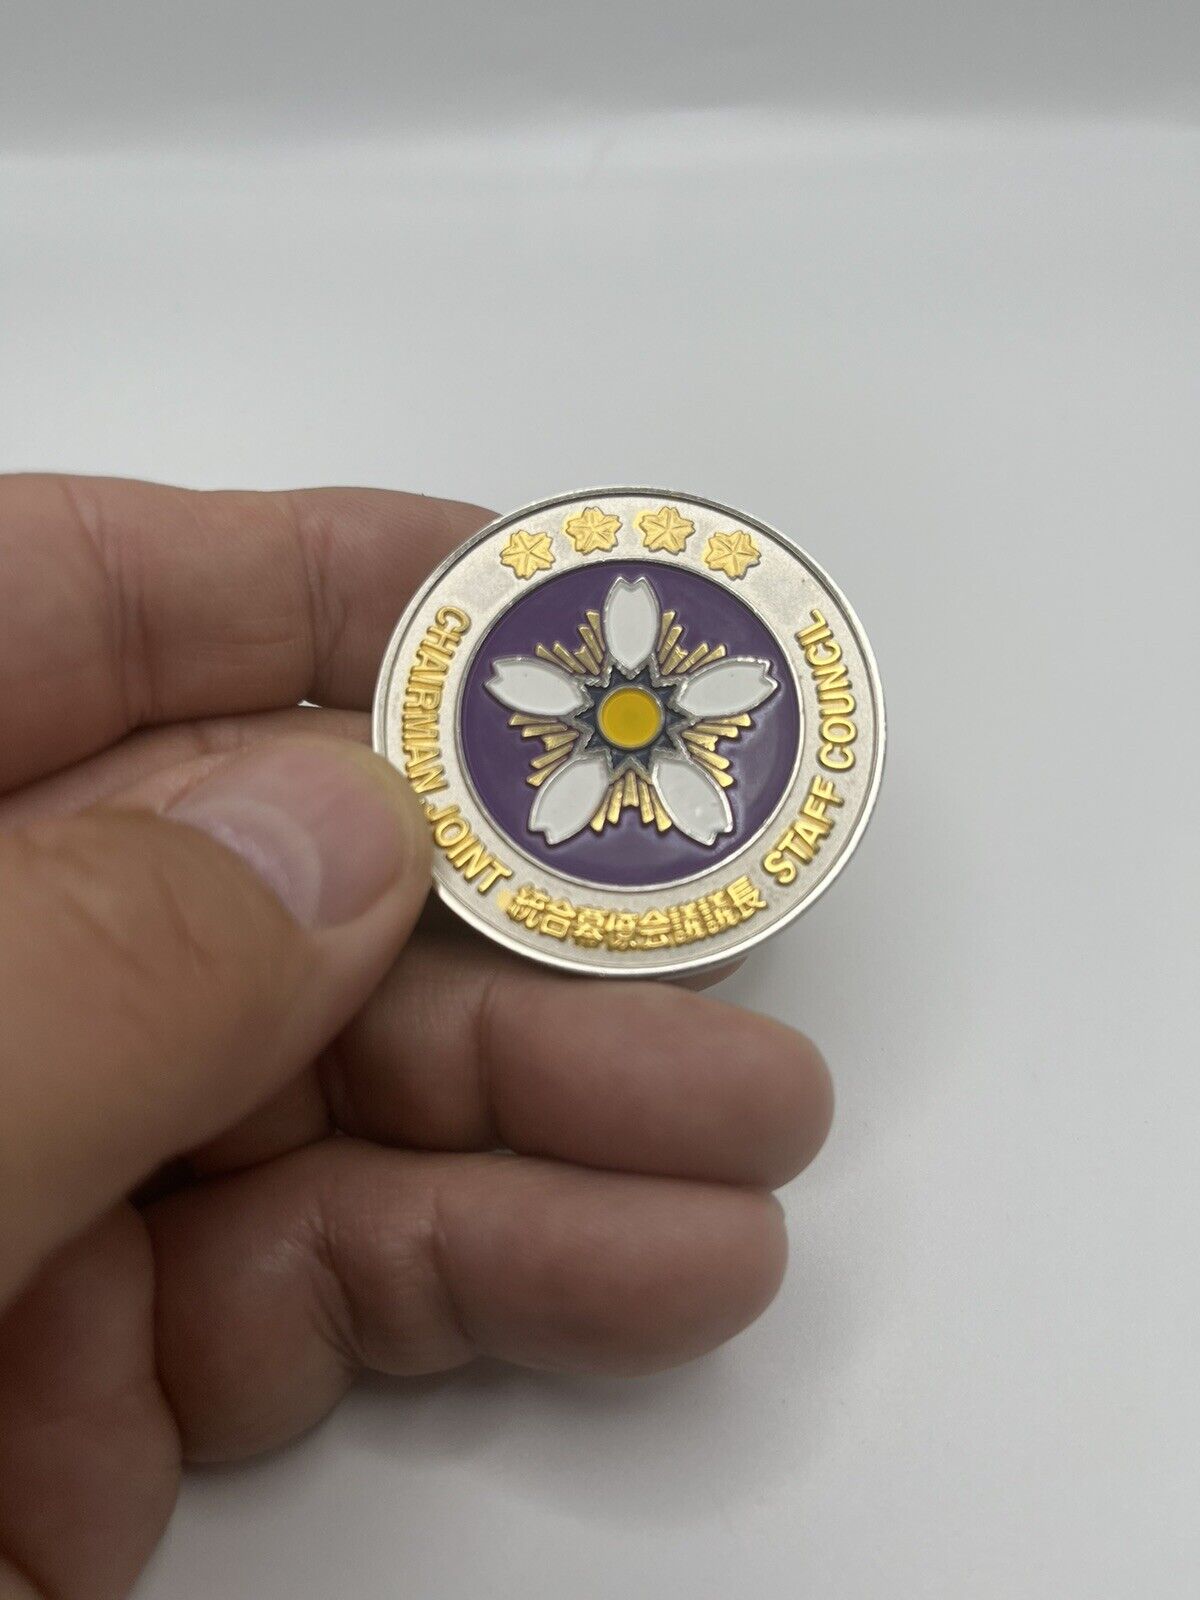 Rare Chairman Joint Staff Council Defense Agency Japan 統合幕僚会議議長 4 Star Coin